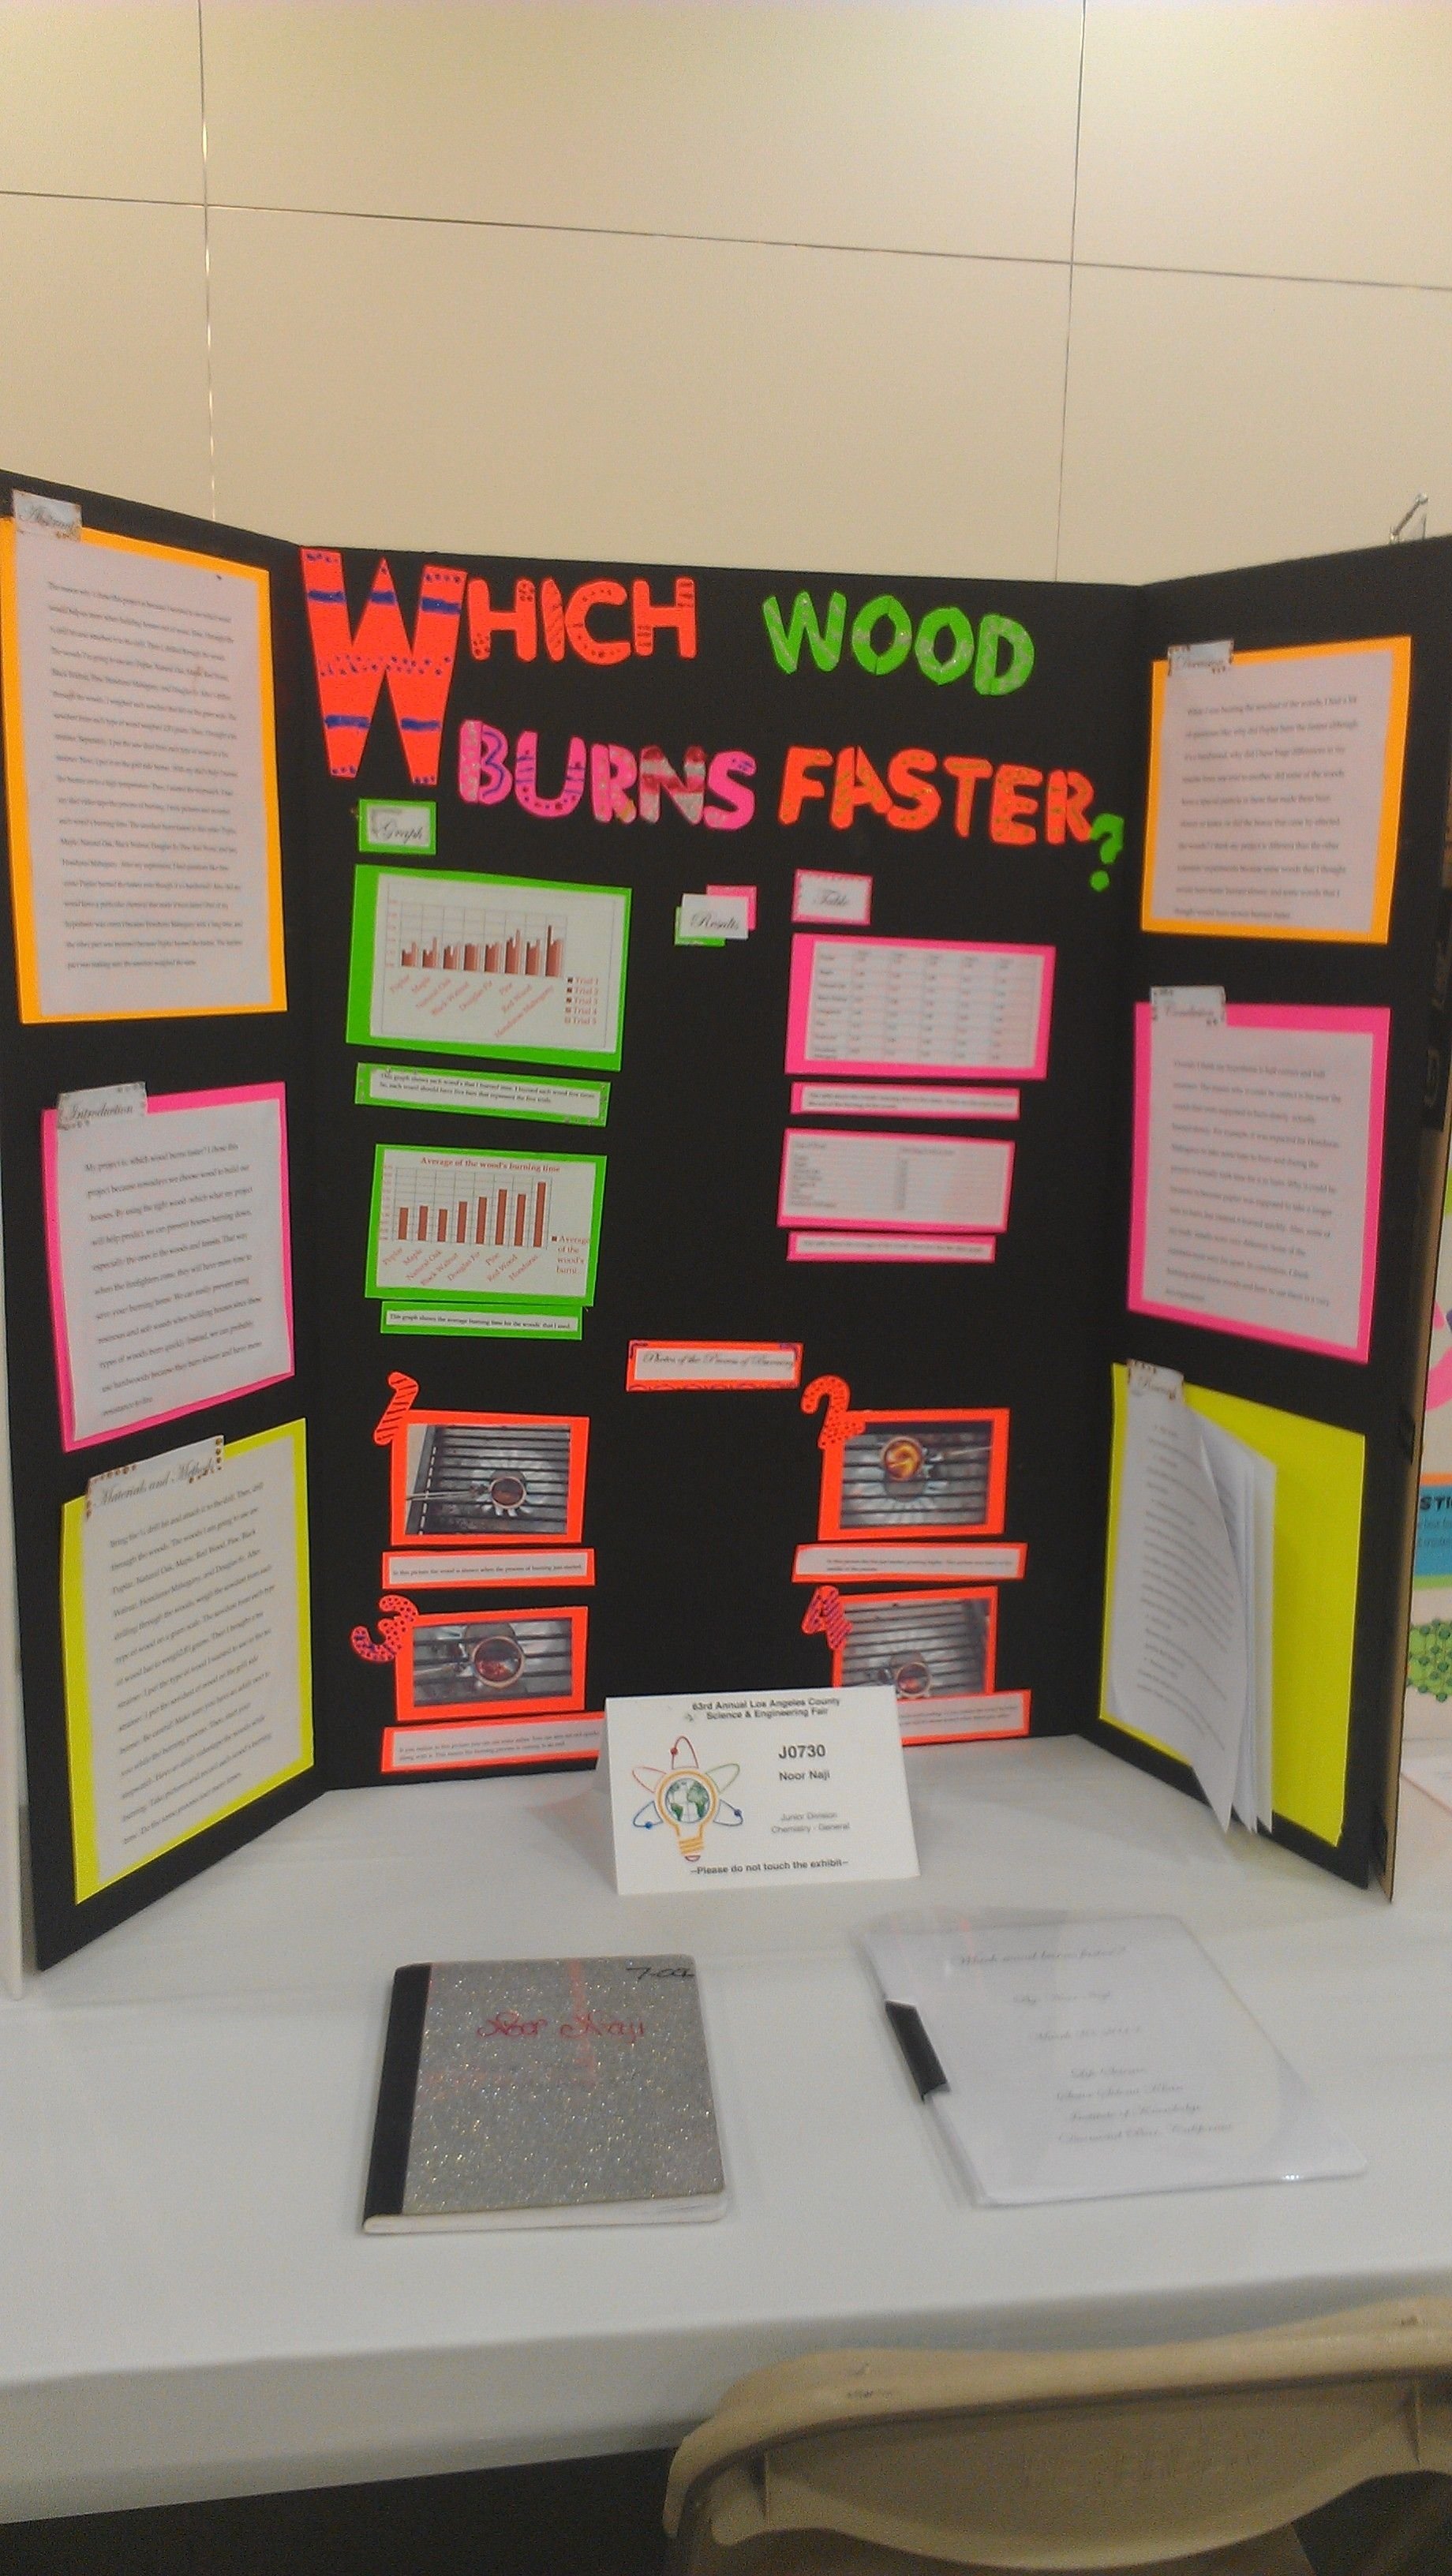 10 Attractive Science Fair Project Ideas For 8Th Grade List 7th grade science fair projectnoor naji 2013 la county science 12 2022